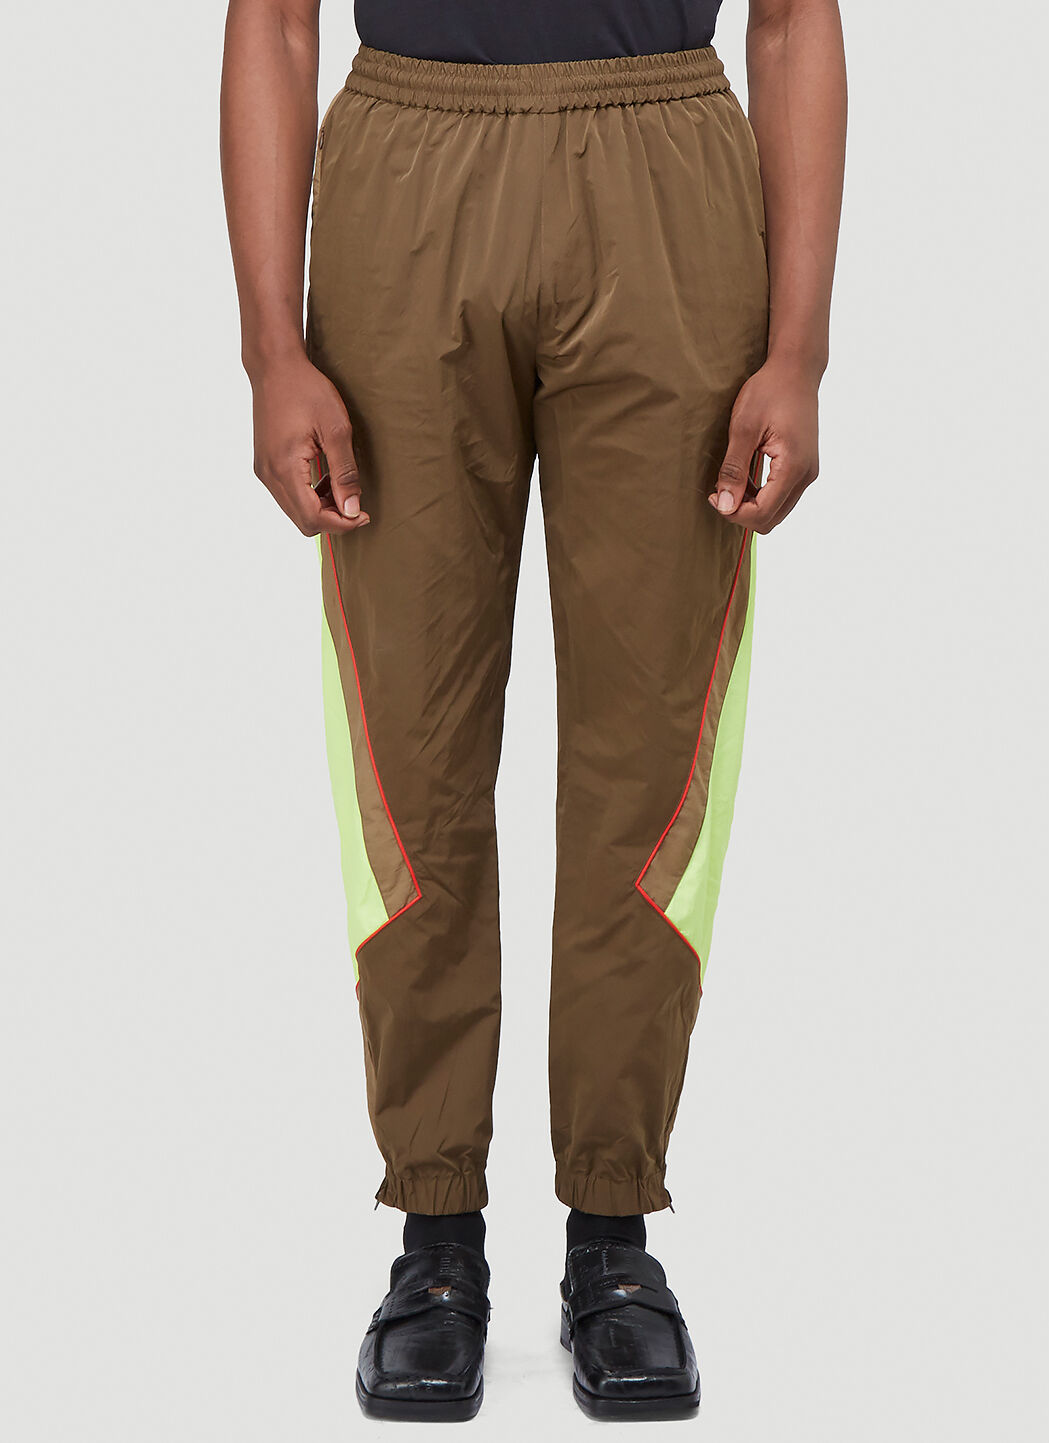 Martine Rose Panelled Track Pants Brown mtr0142006